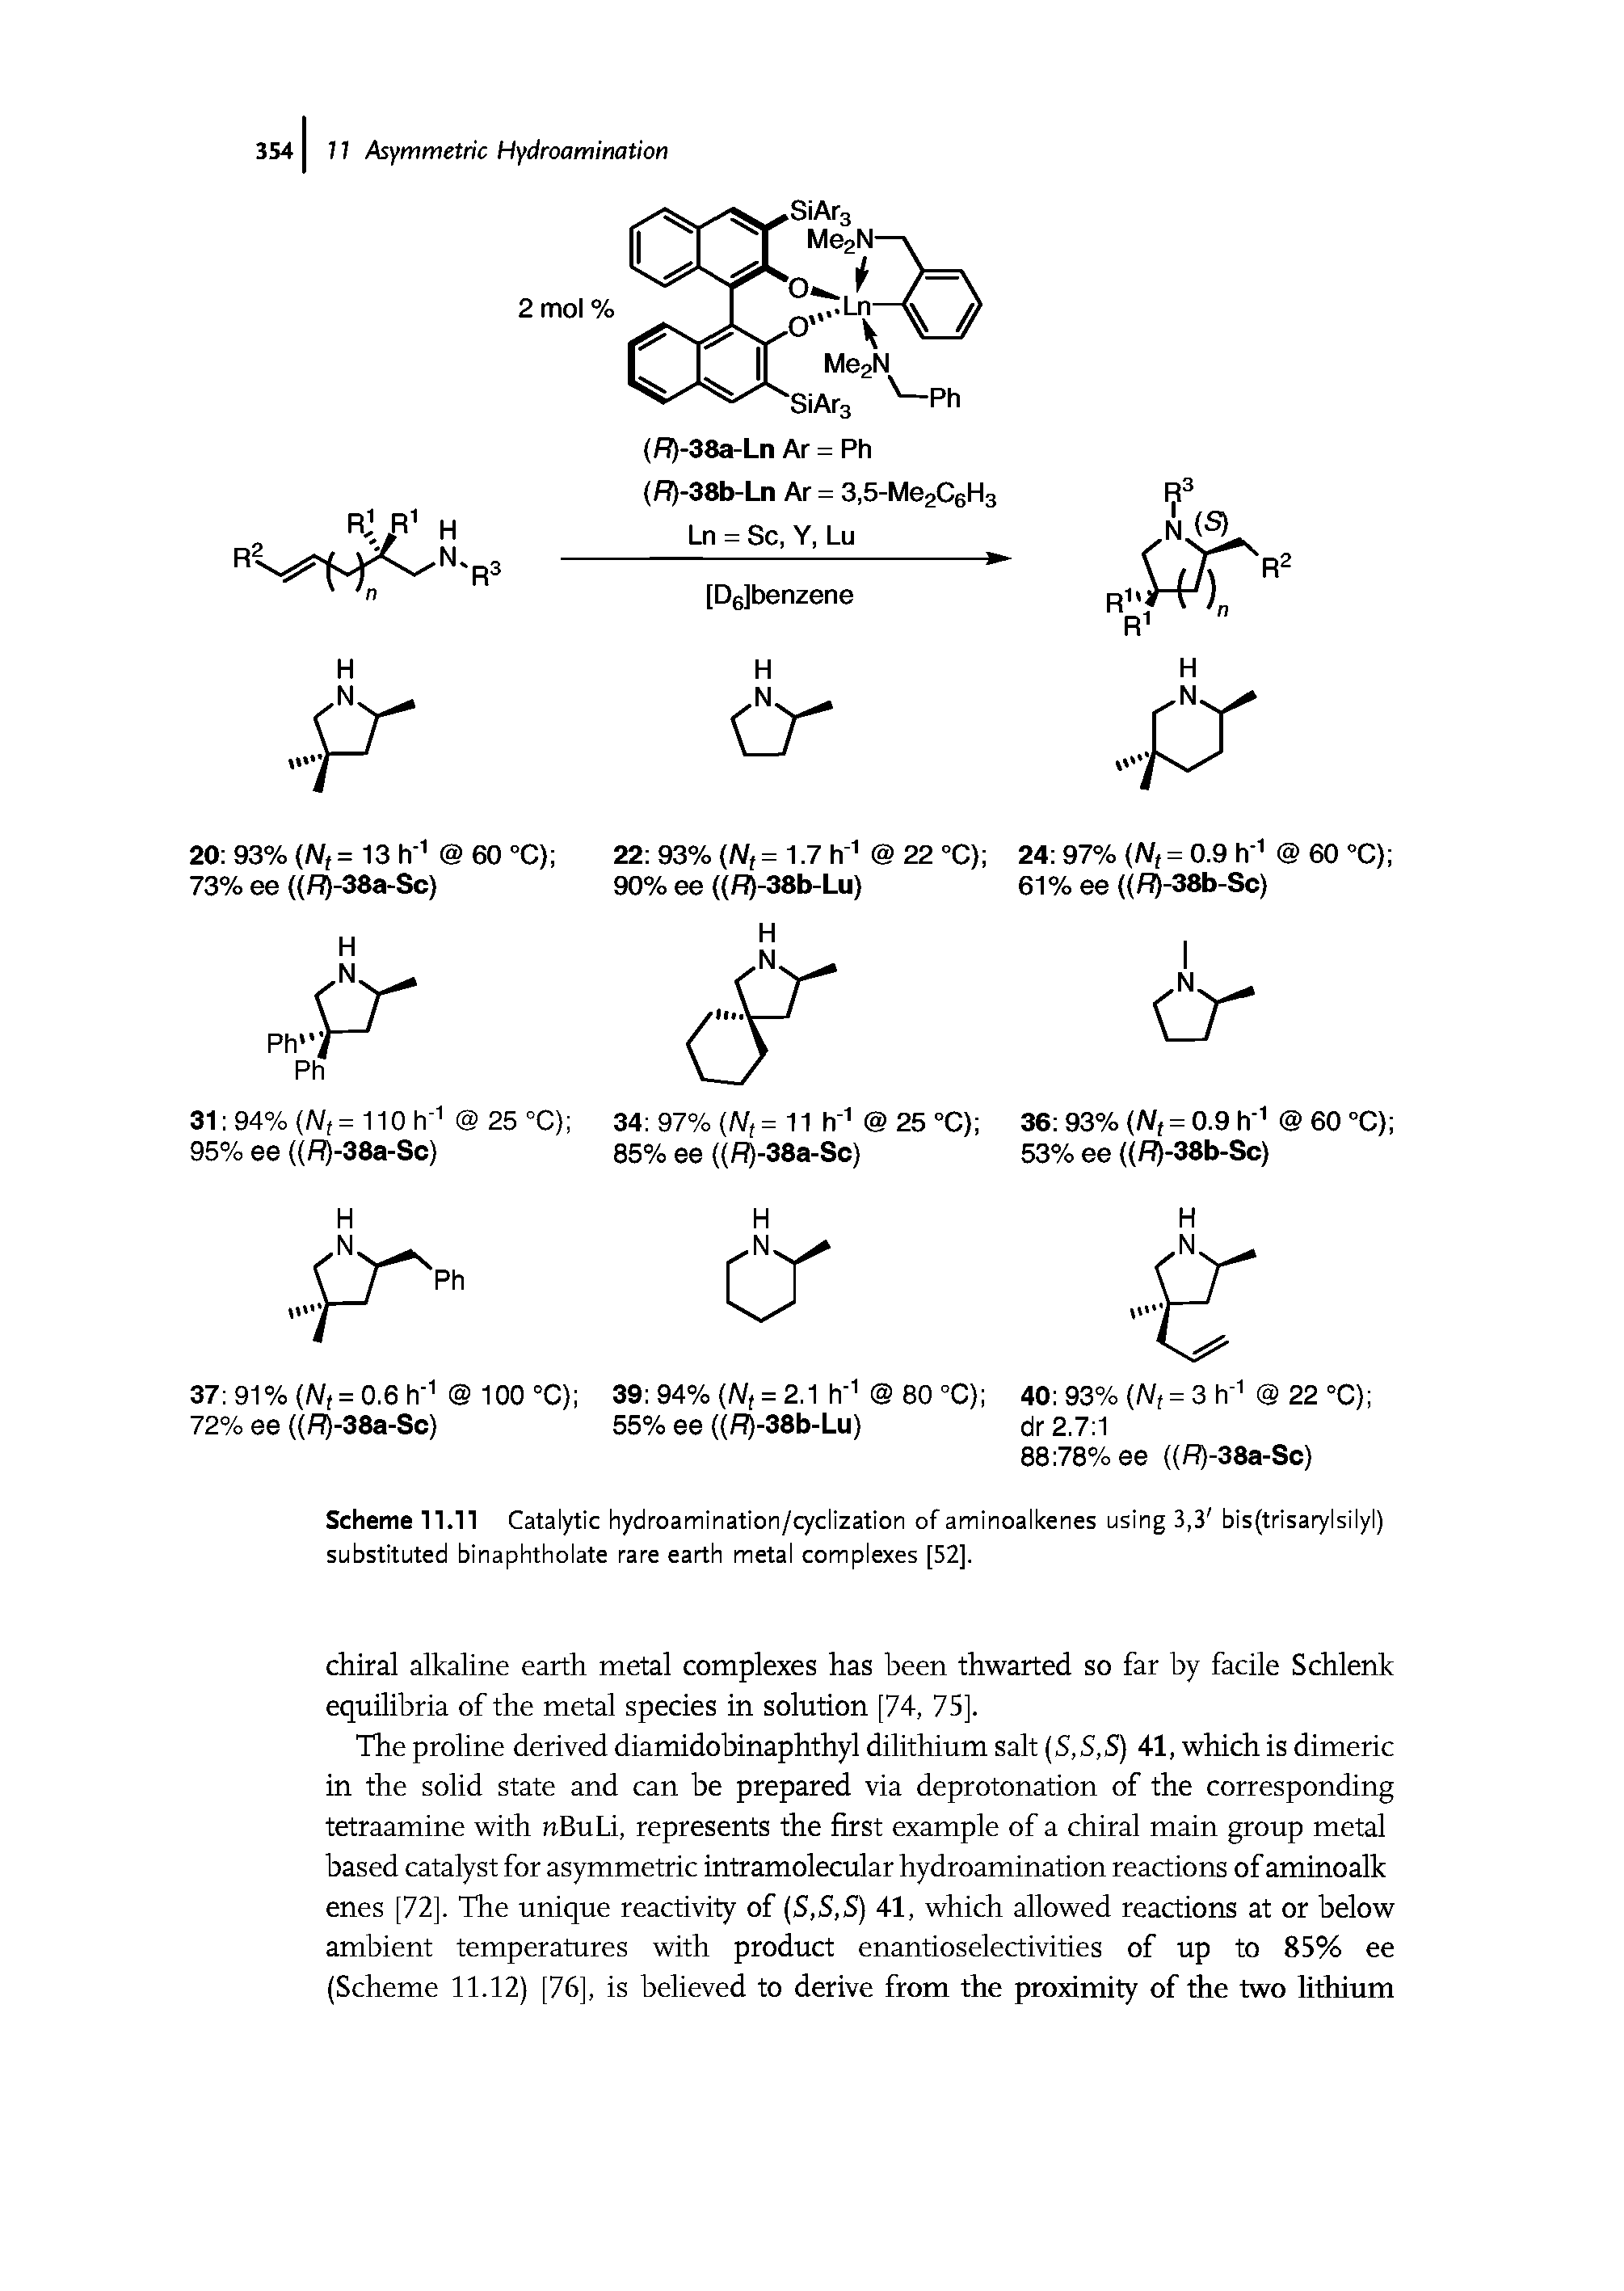 Scheme 11.11 Catalytic hydroamination/cyclization of aminoalkenes using 3,3 bisftrisarylsih substituted binaphtholate rare earth metal complexes [52].